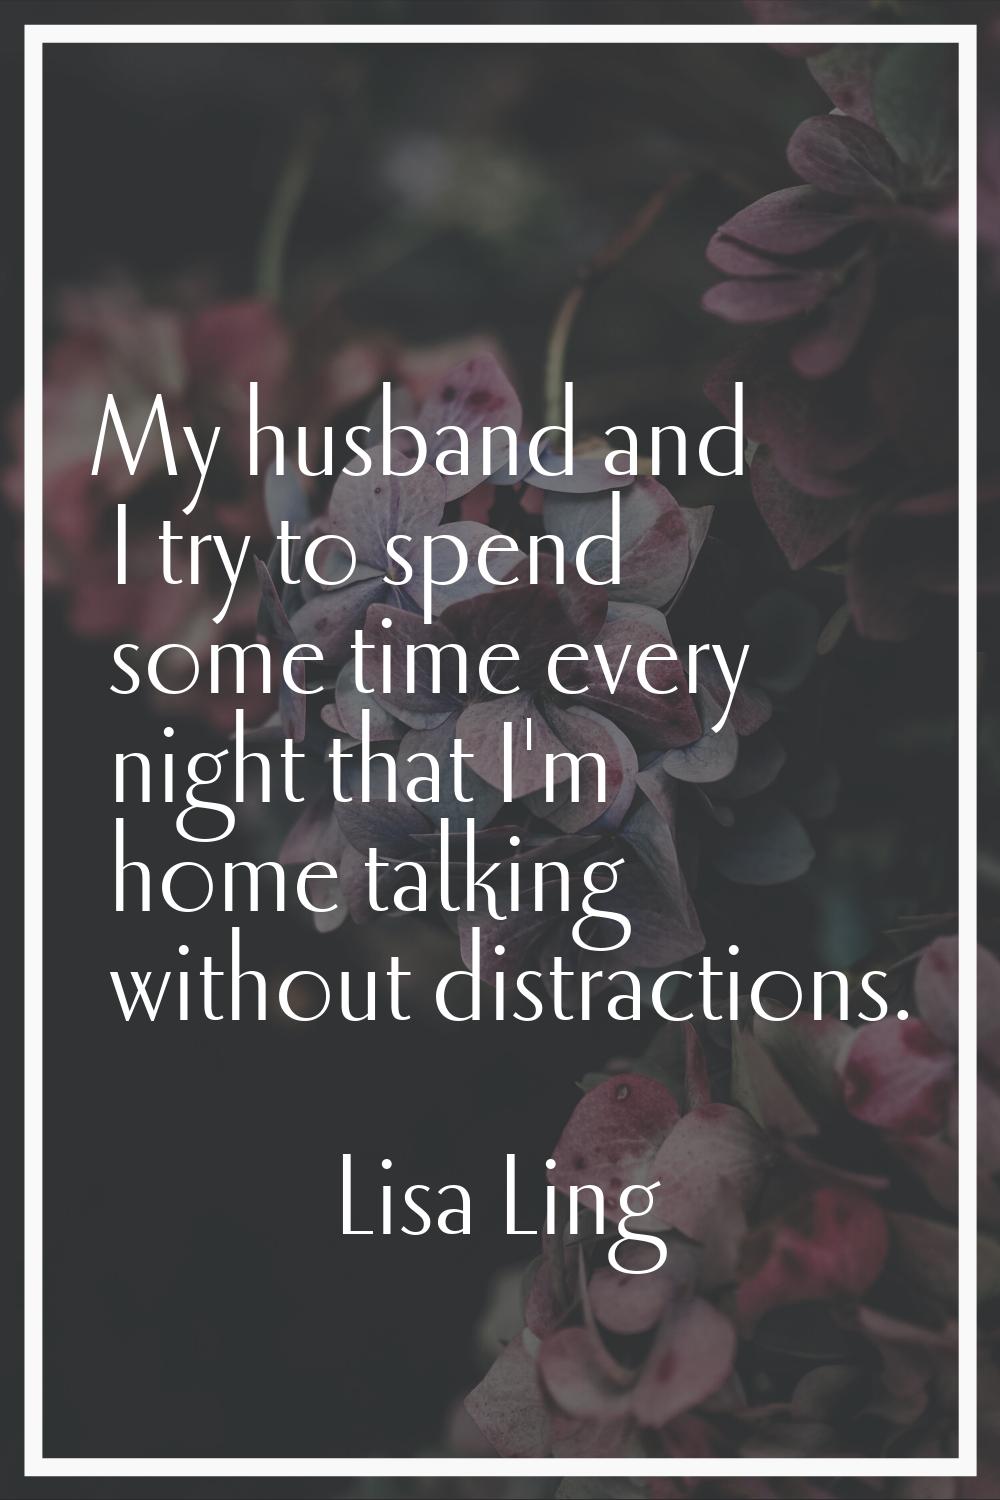 My husband and I try to spend some time every night that I'm home talking without distractions.